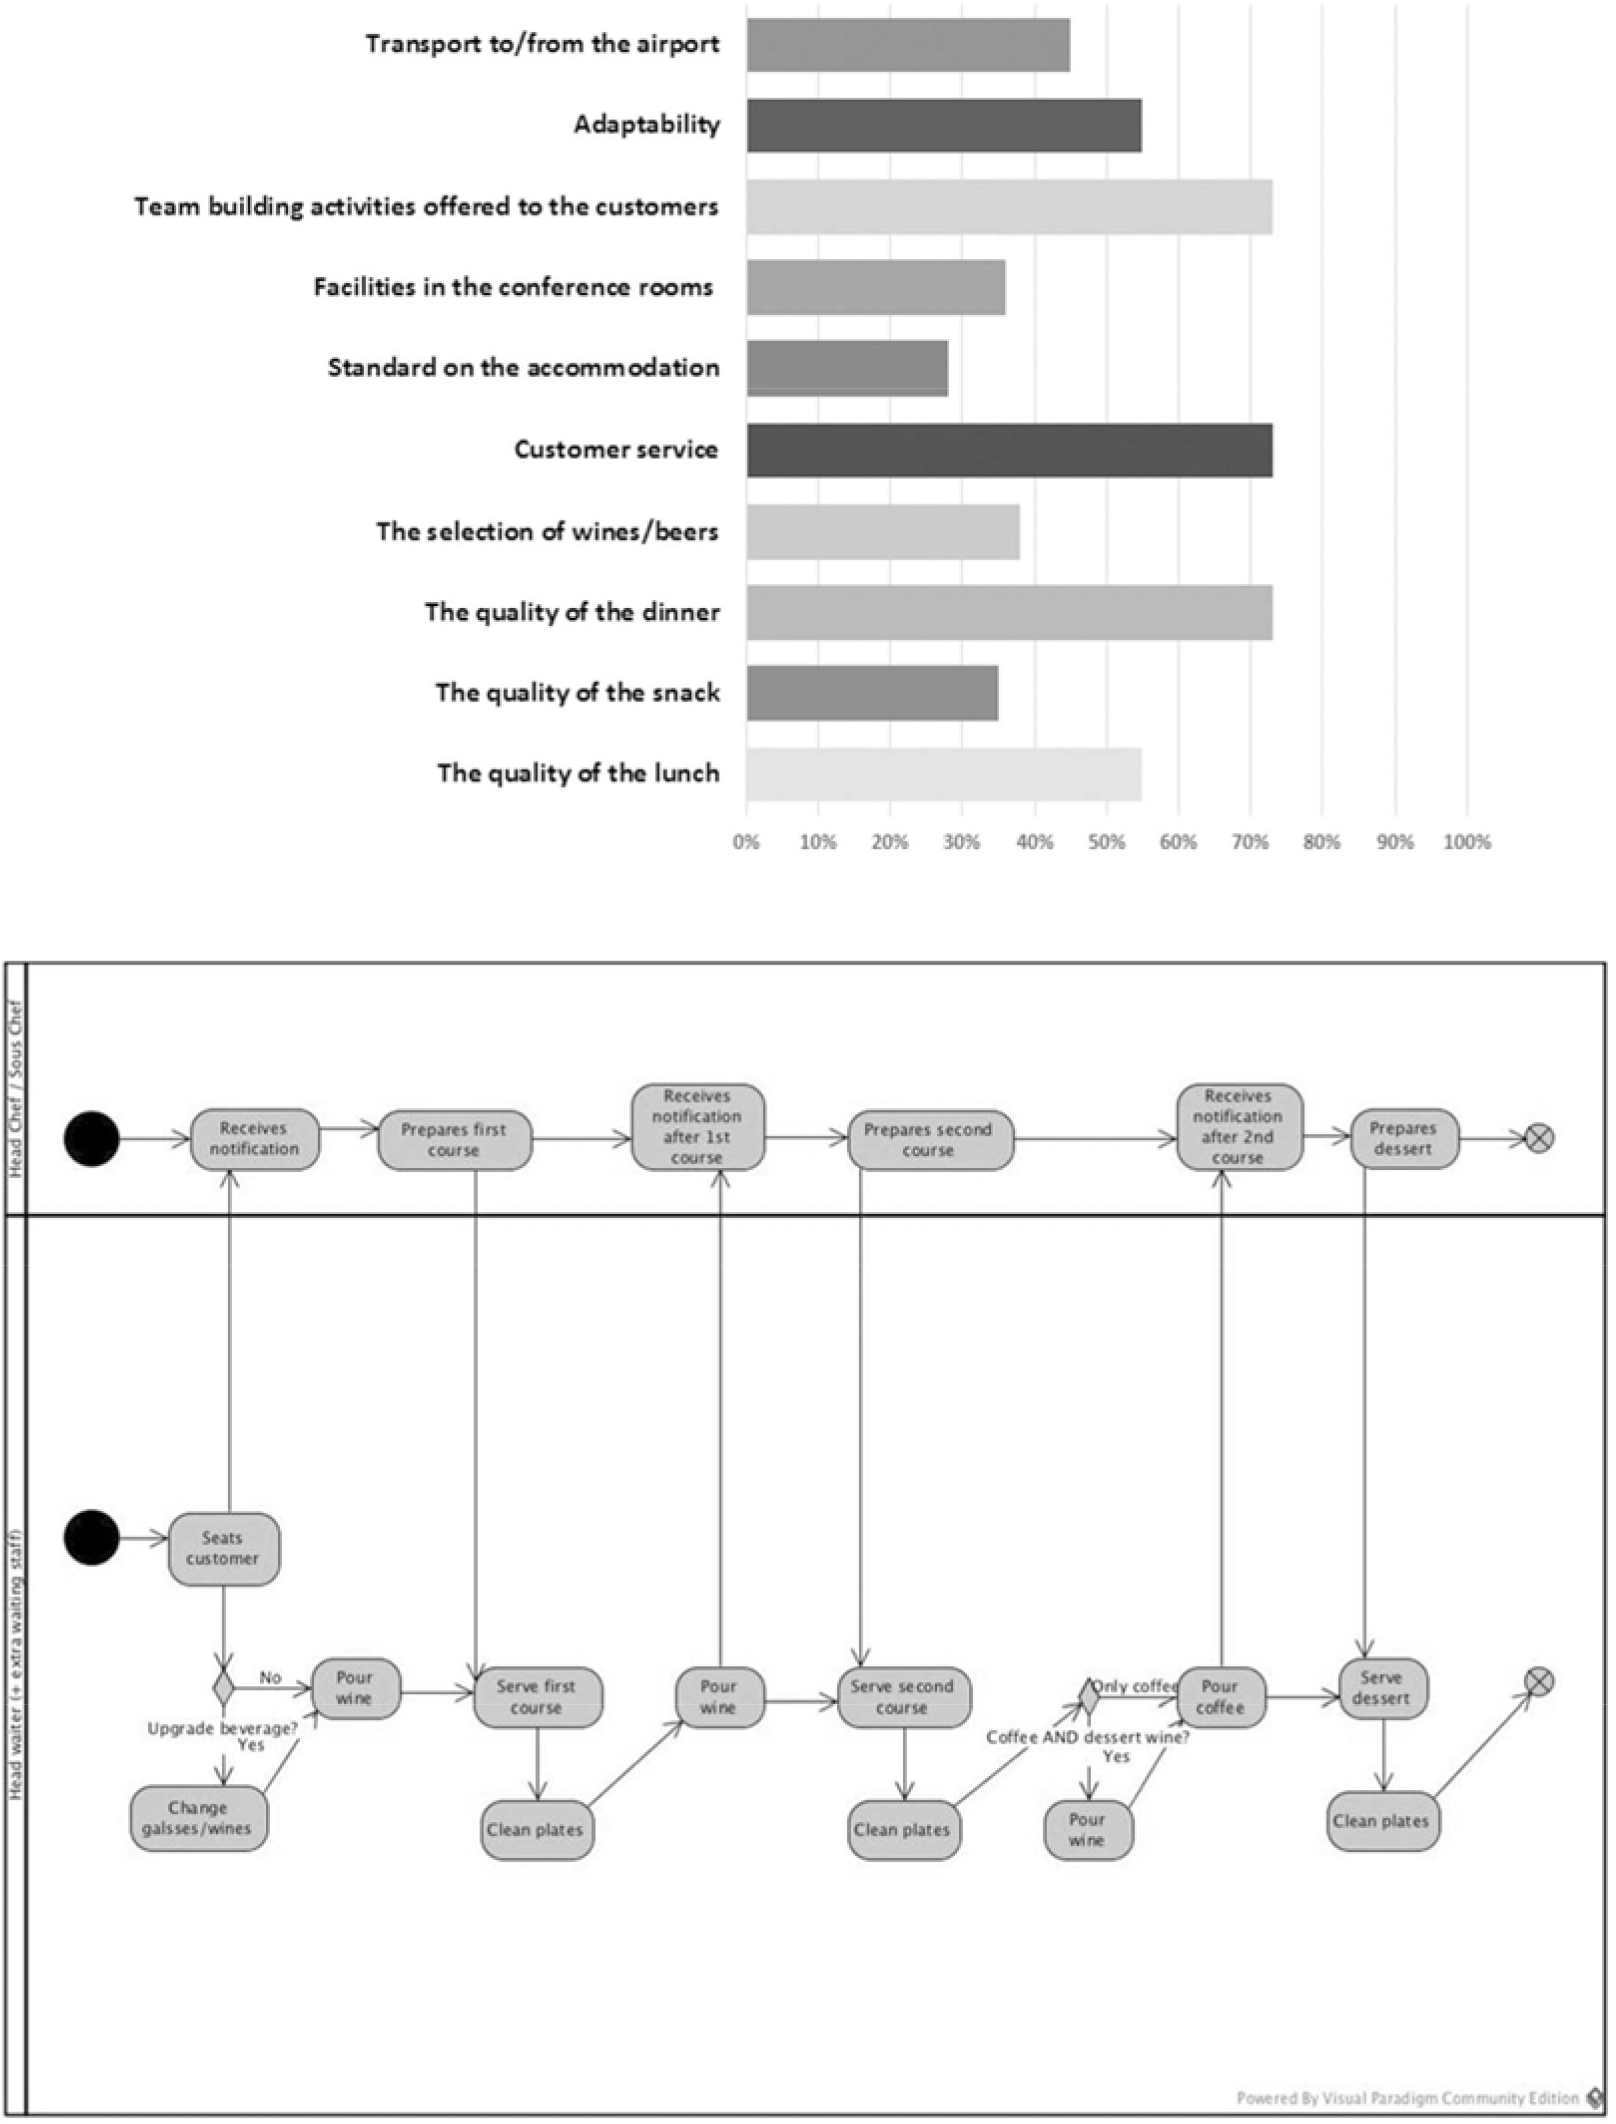 The first image is a bar graph that plots the percentage of responses across different categories in an employee survey. The second is a flow chart that illustrates the meal service process.